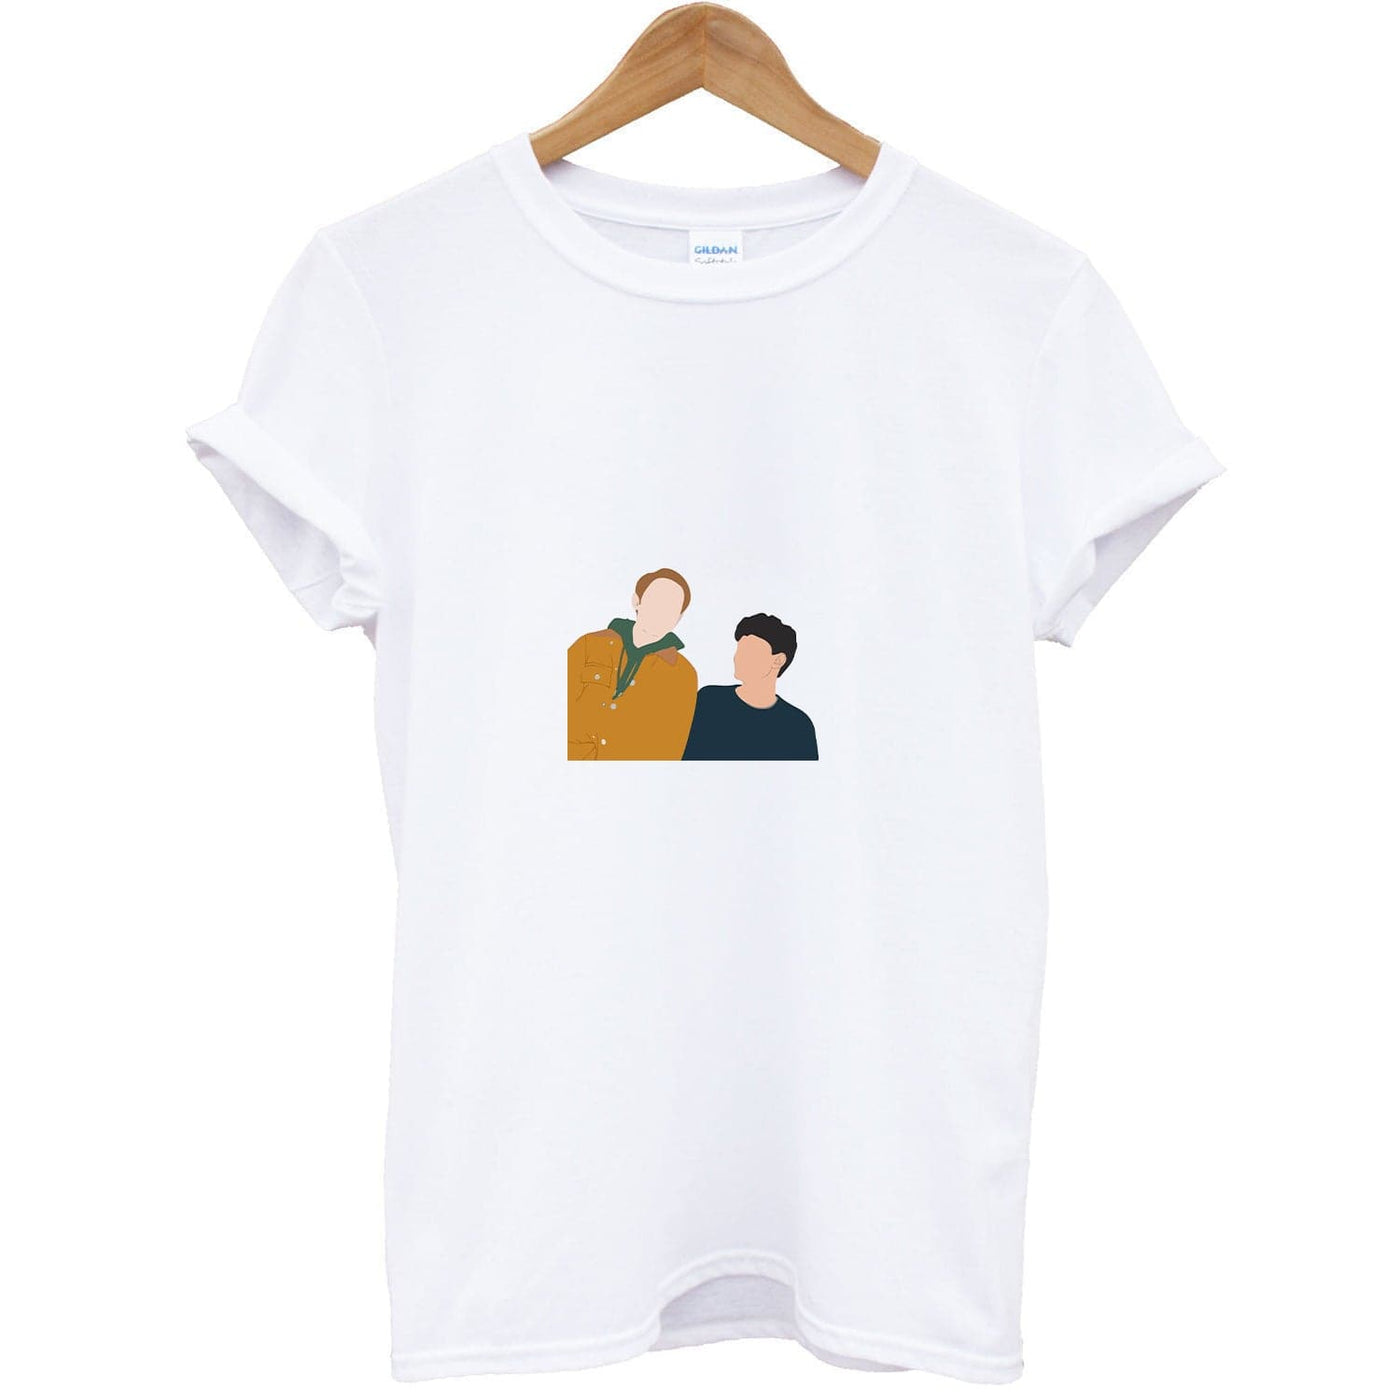 Nick And Charlie - Heartstopper T-Shirt